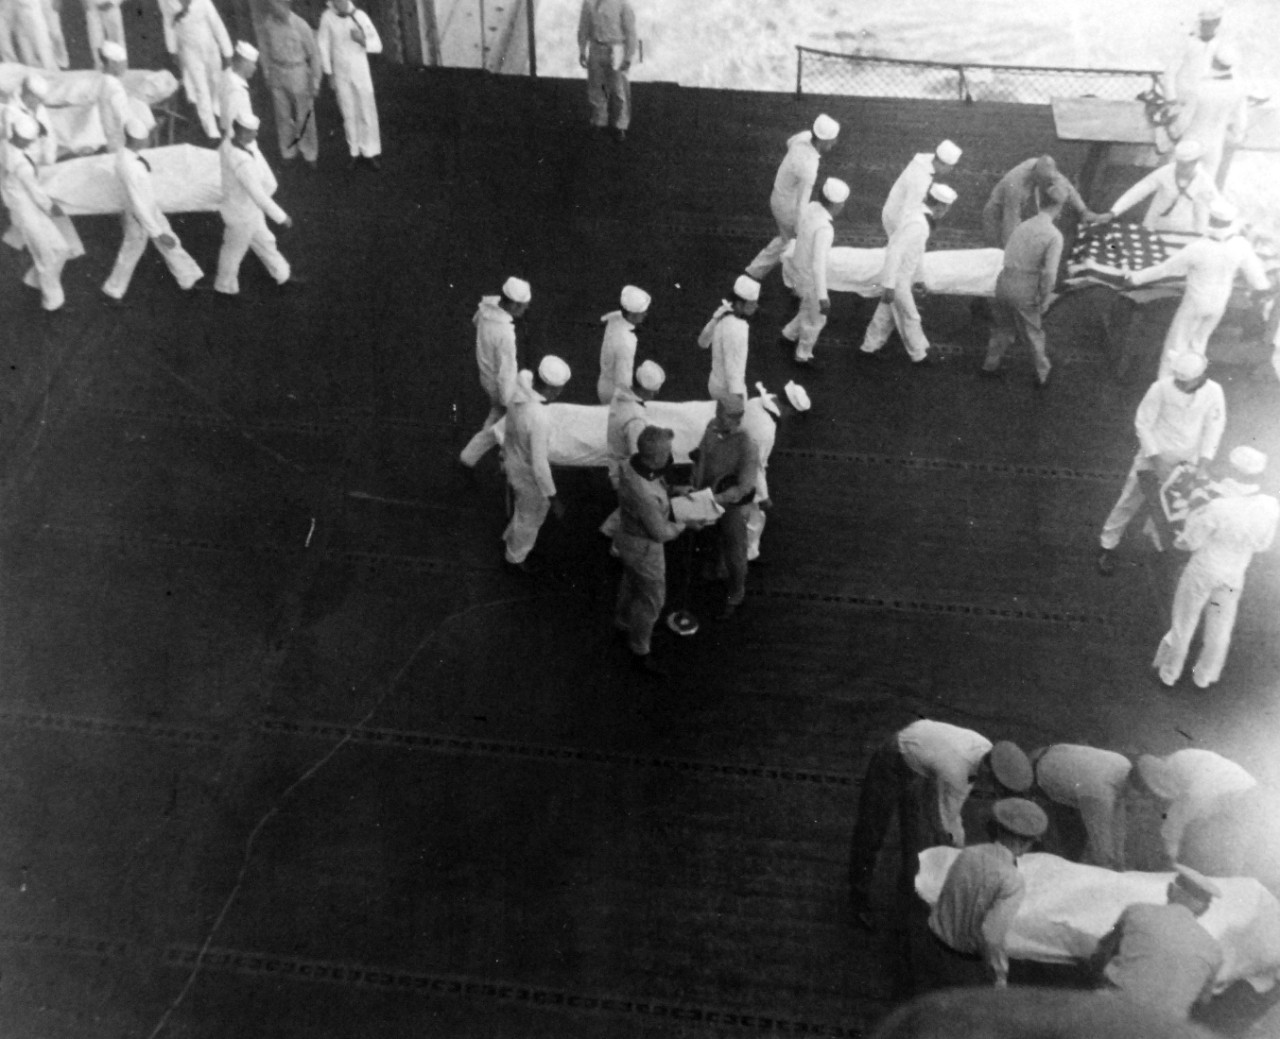 80-G-49694: Burial at Sea, June 1945. Navy casualties from a Kamikaze attack on an Essex-class carrier are buried at sea in a moving ceremony.  Released June 28, 1945.   Official U.S. Navy photograph, now in the collections of the National Archives.  